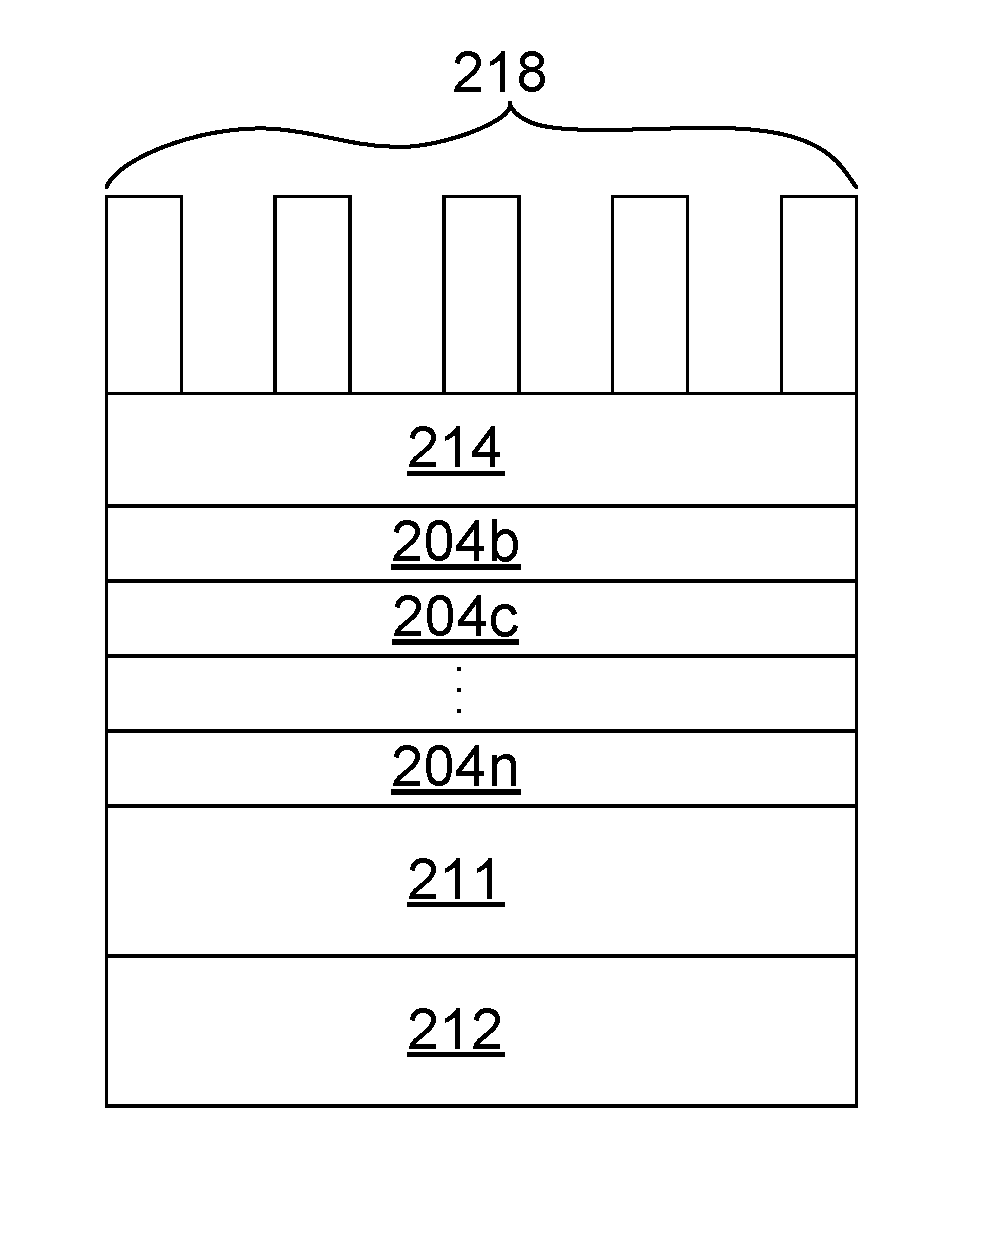 Fabrication of iii-v-on-insulator platforms for semiconductor devices